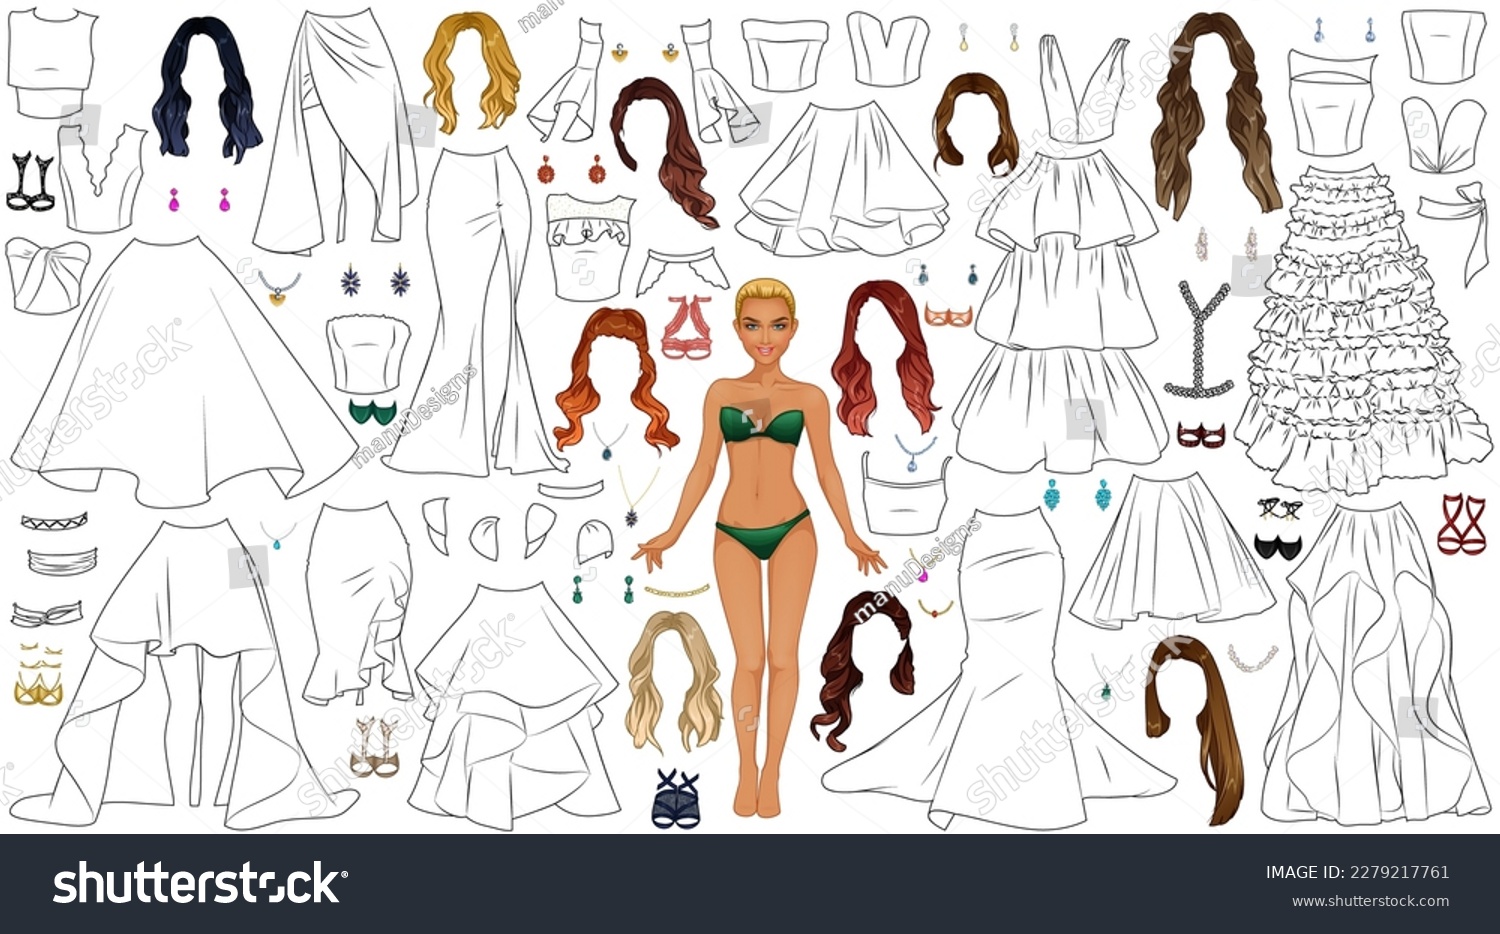 Homeing coloring page paper doll outfits stock vector royalty free